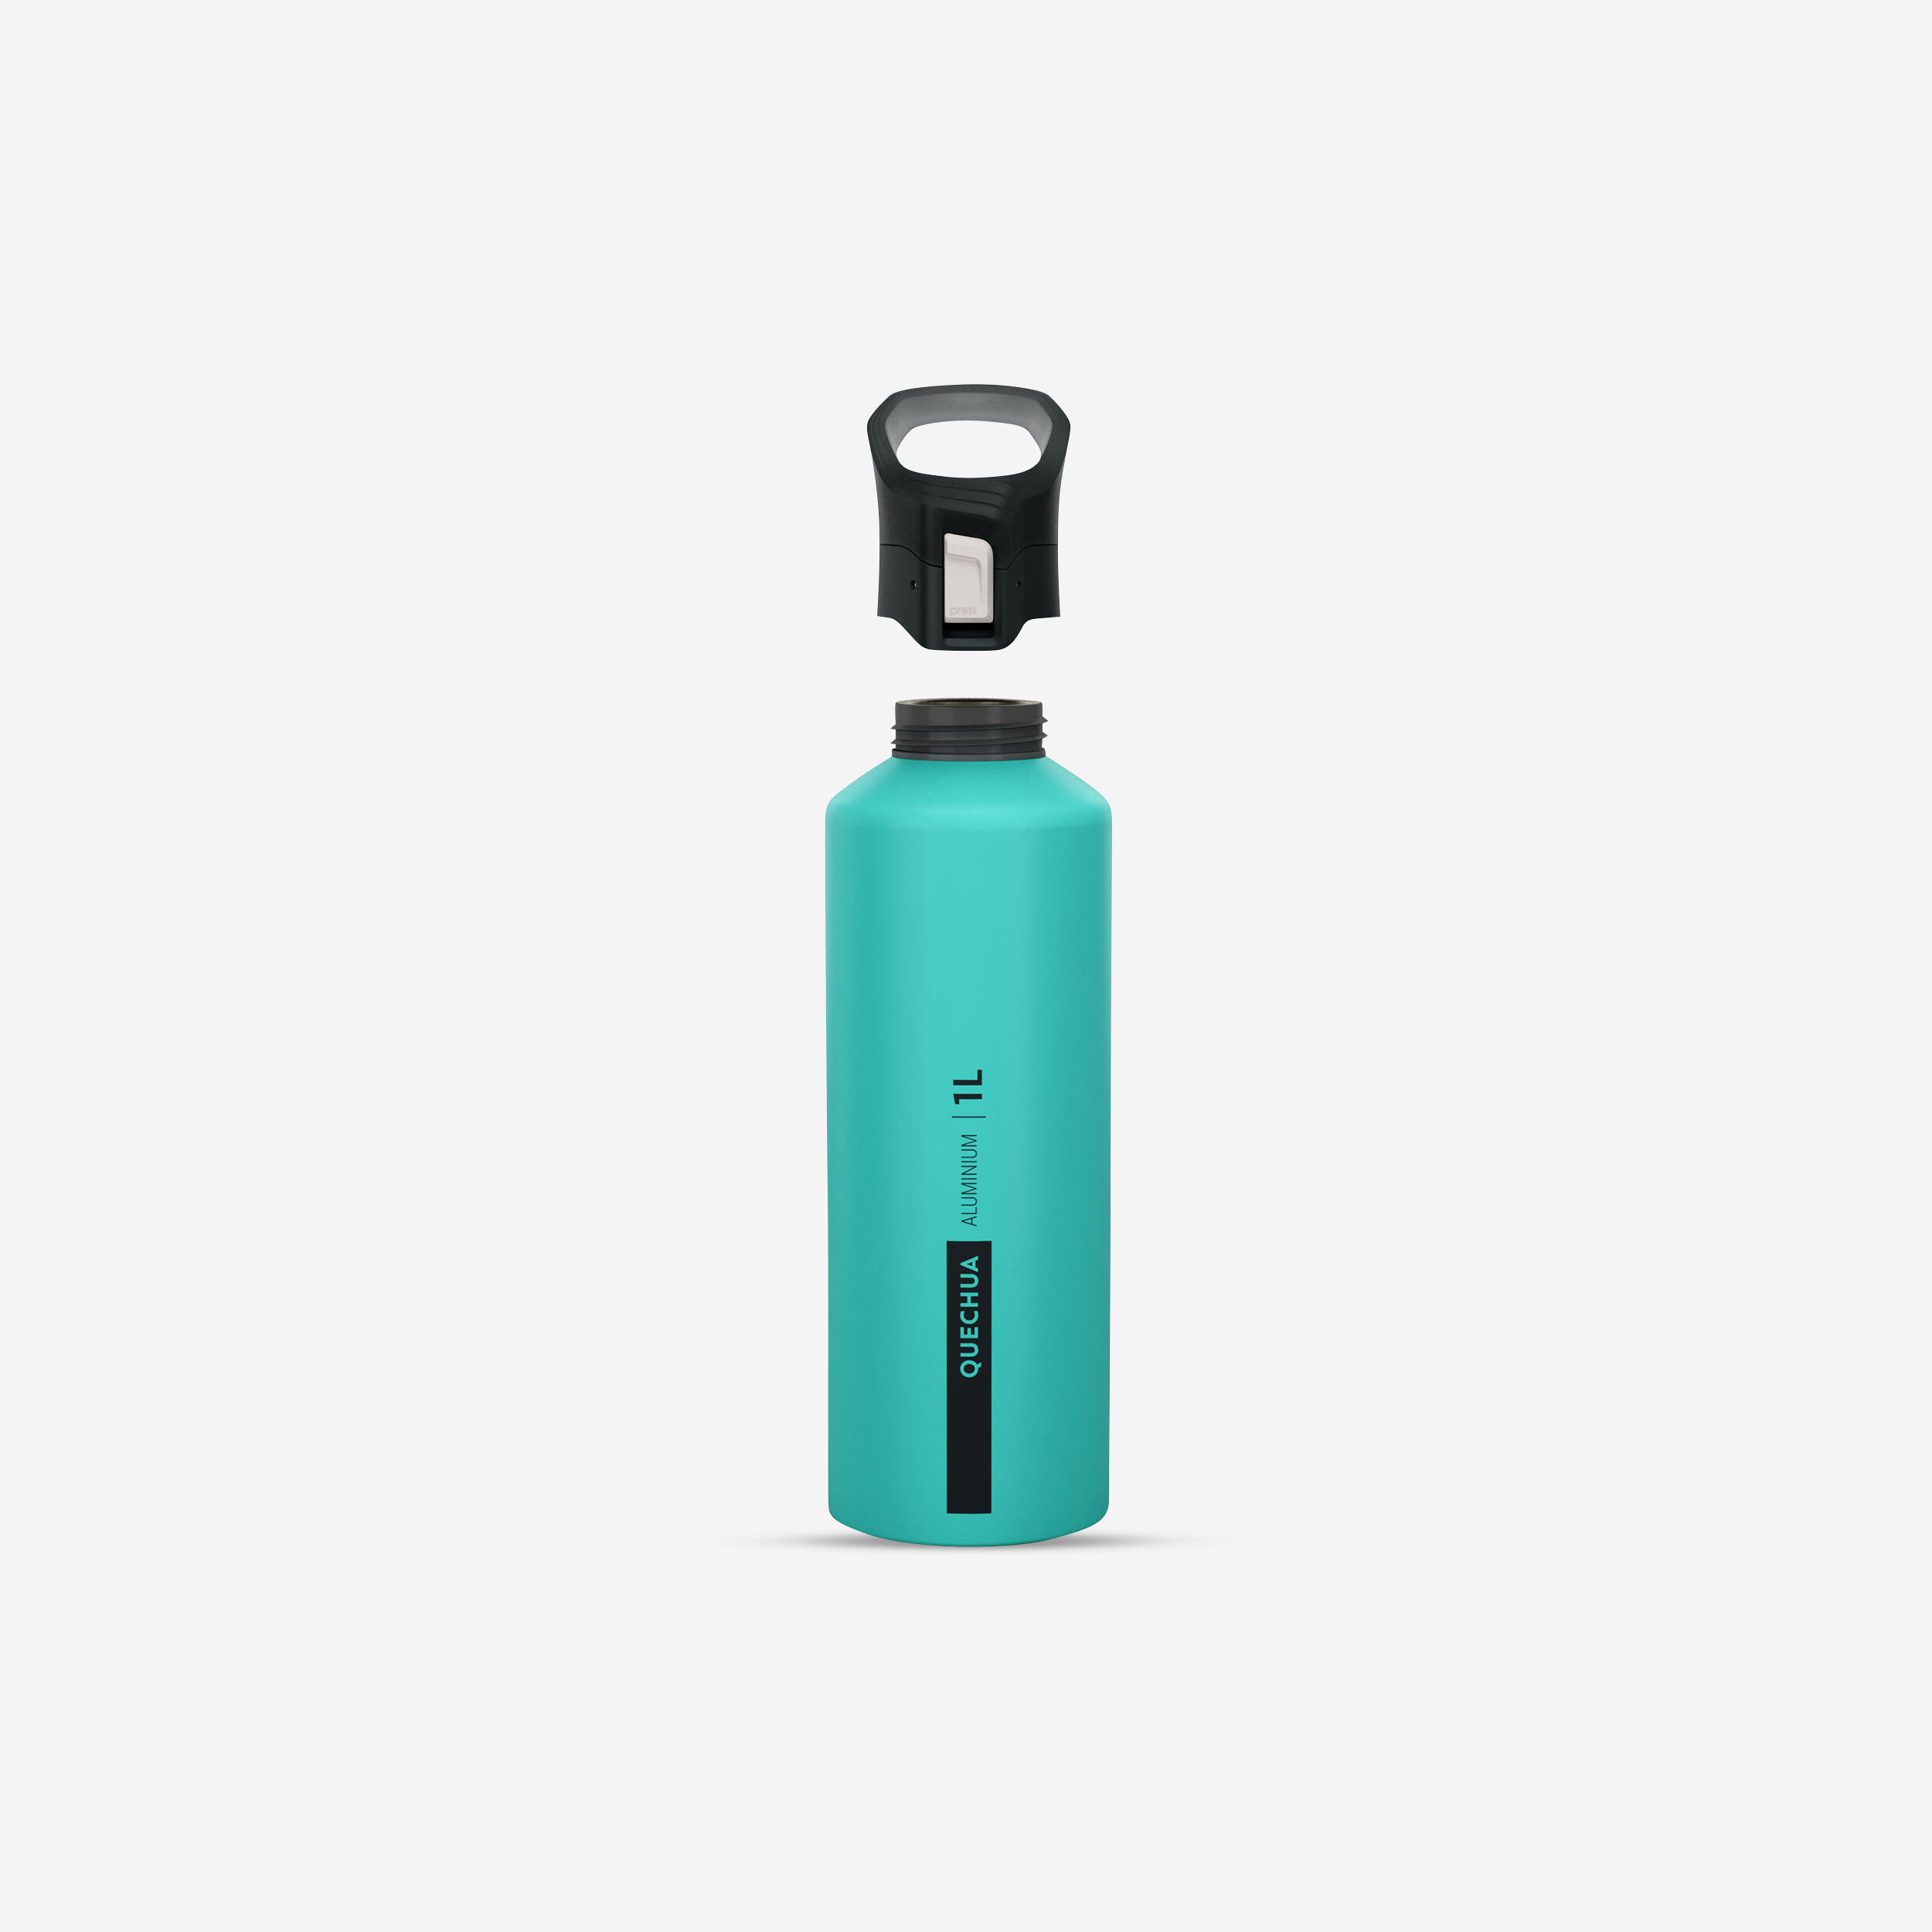 Aluminium 1 L flask with quick opening cap for hiking - Green 1/9